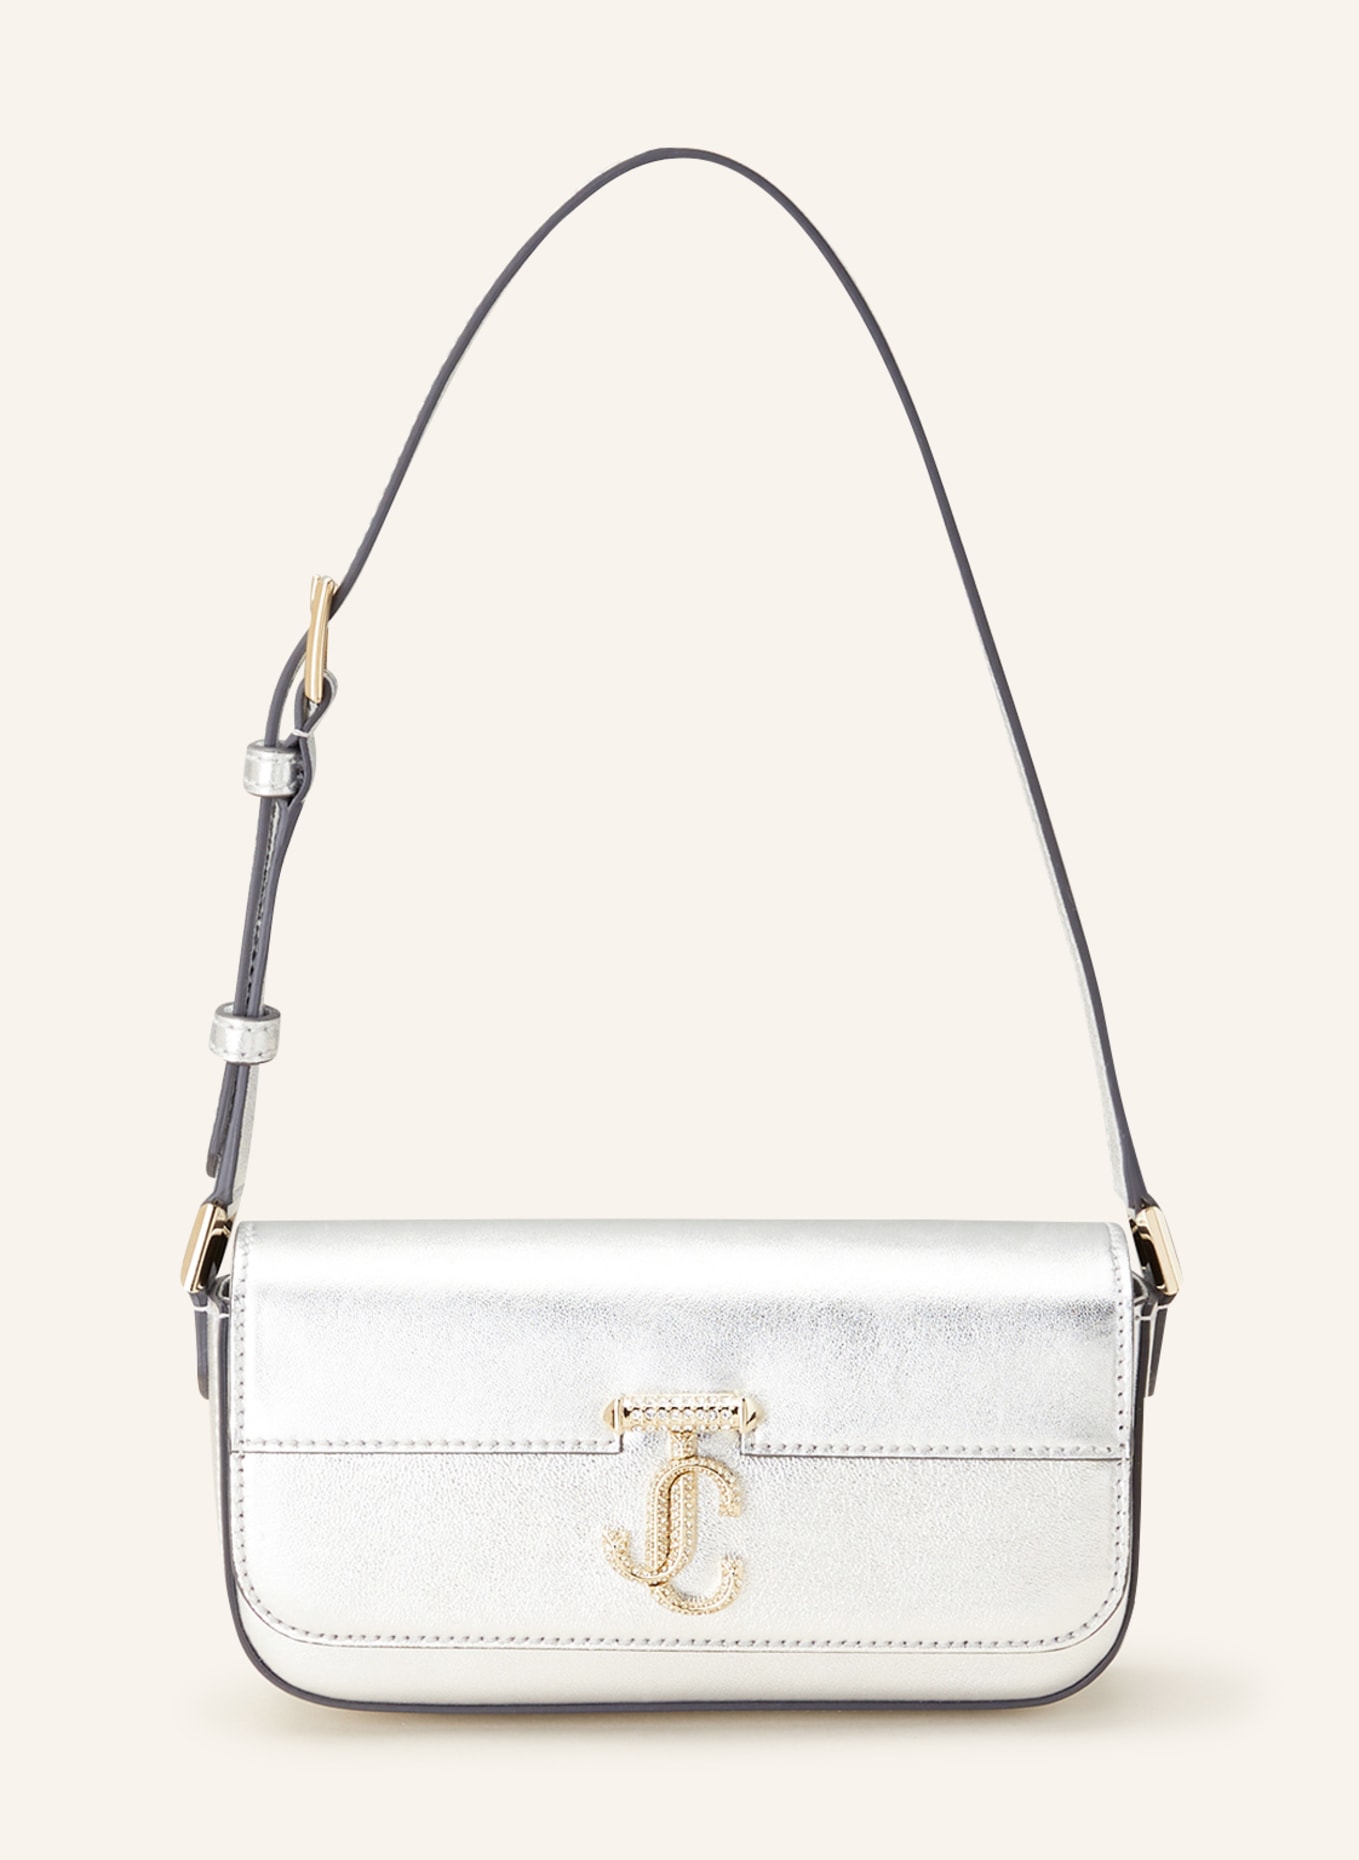 Buy Jimmy choo Monogrammed Varenne Pouch, Clear Color Women